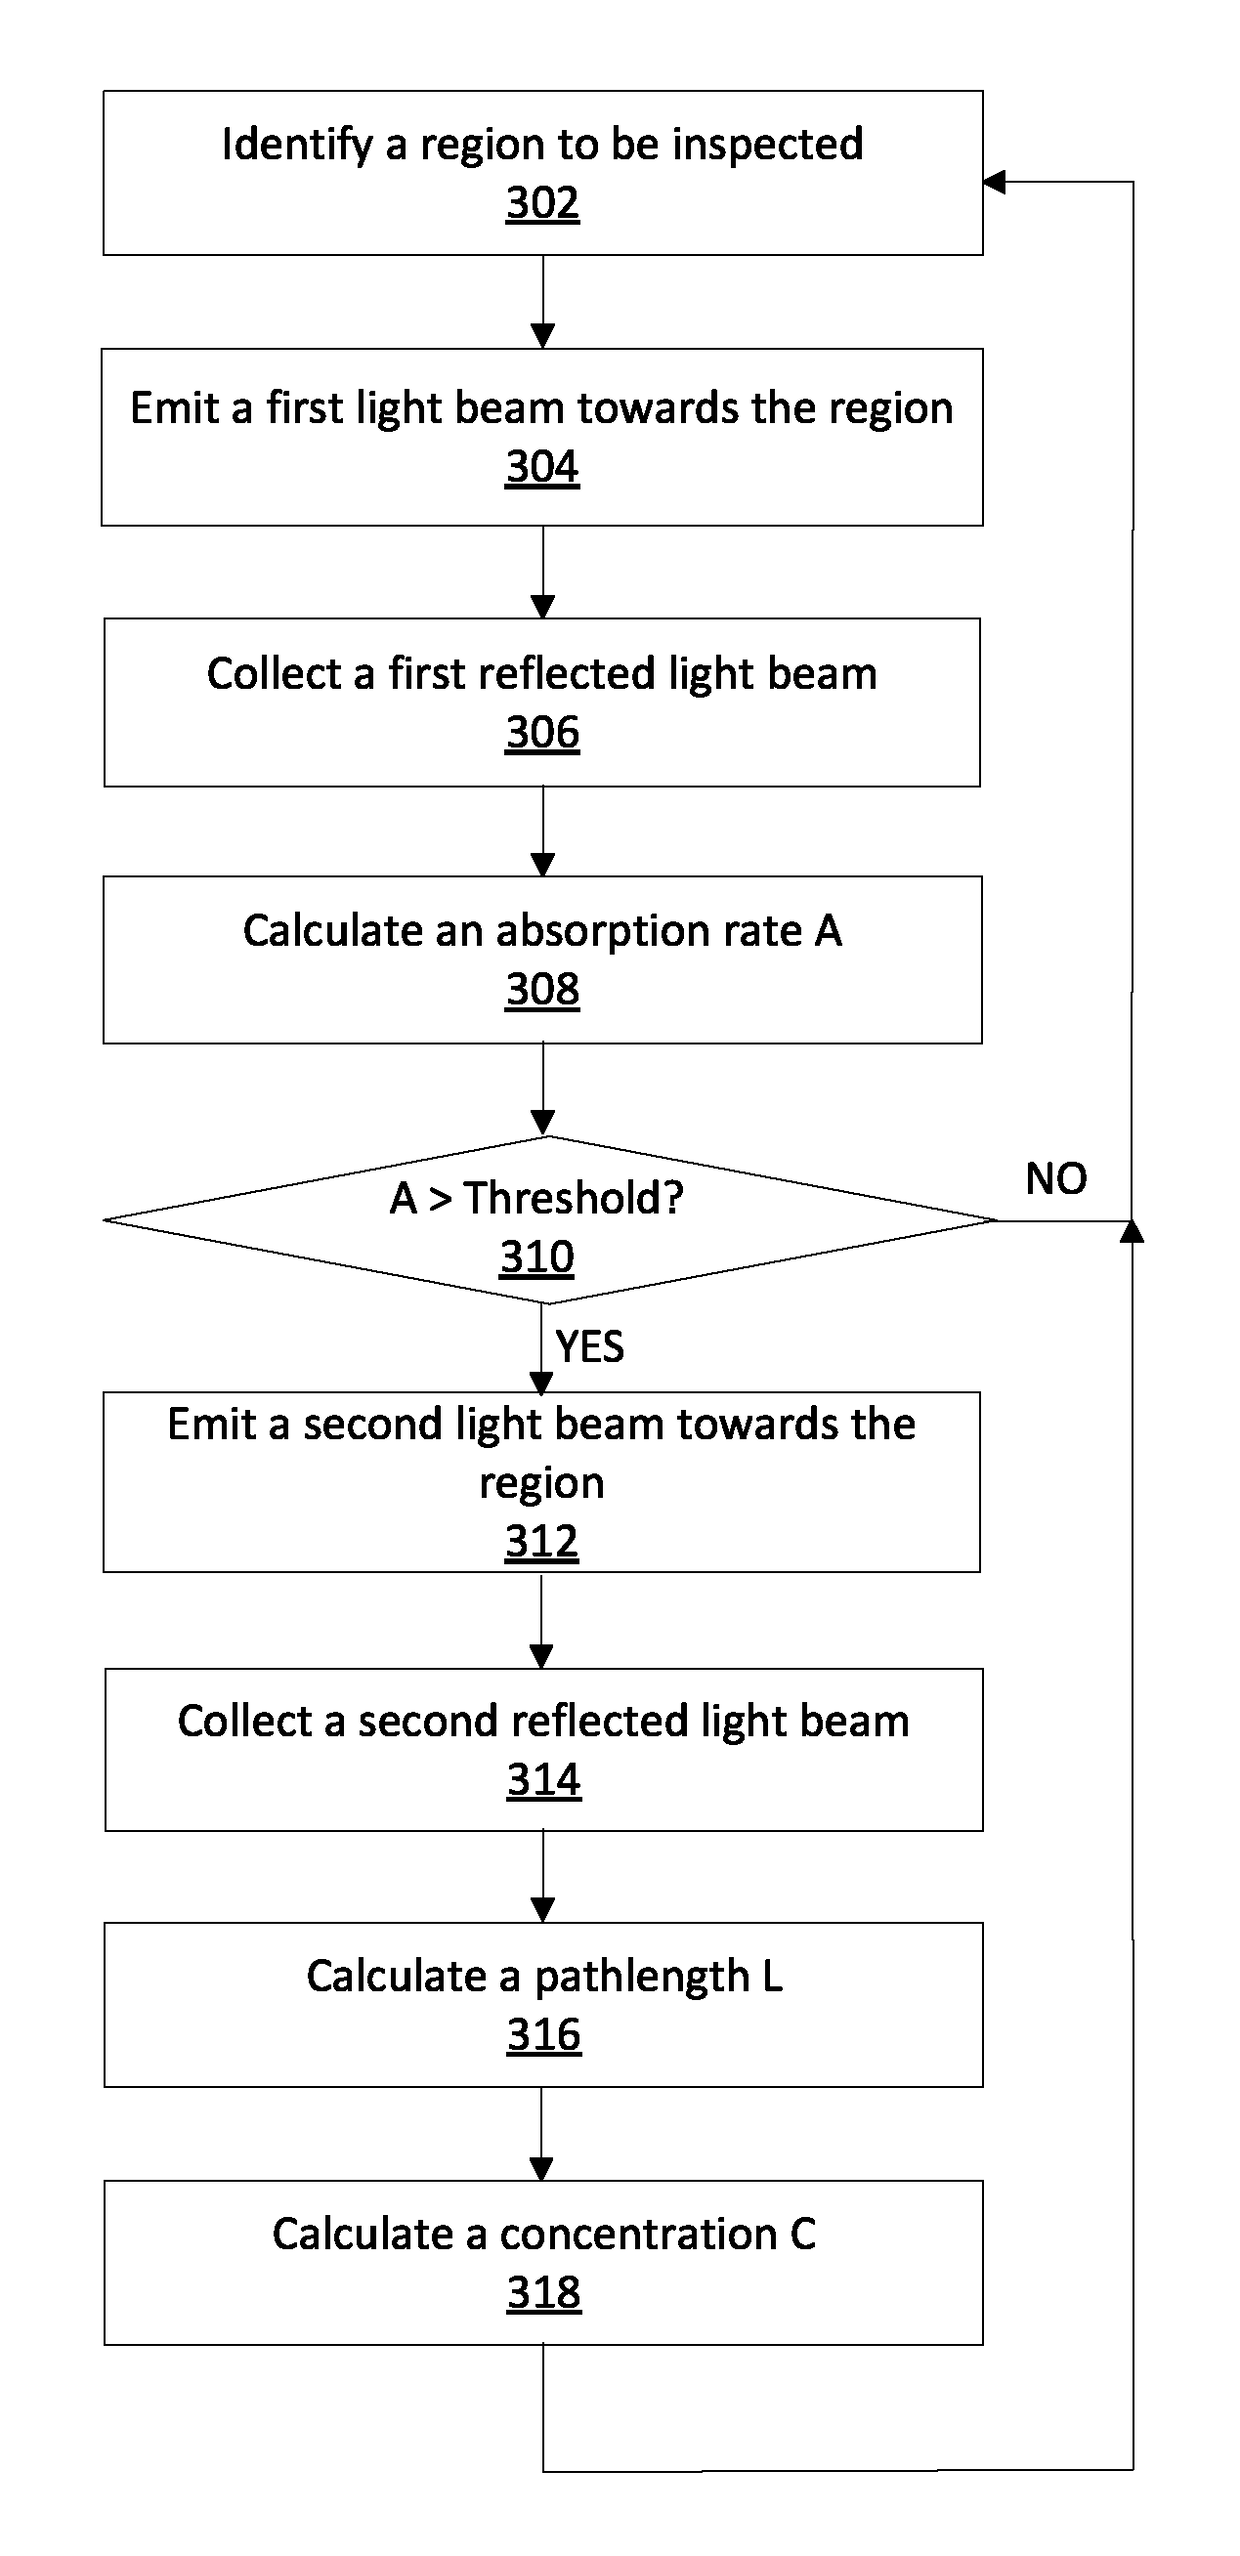 Remote gas leakage detection systems using mid-infrared laser